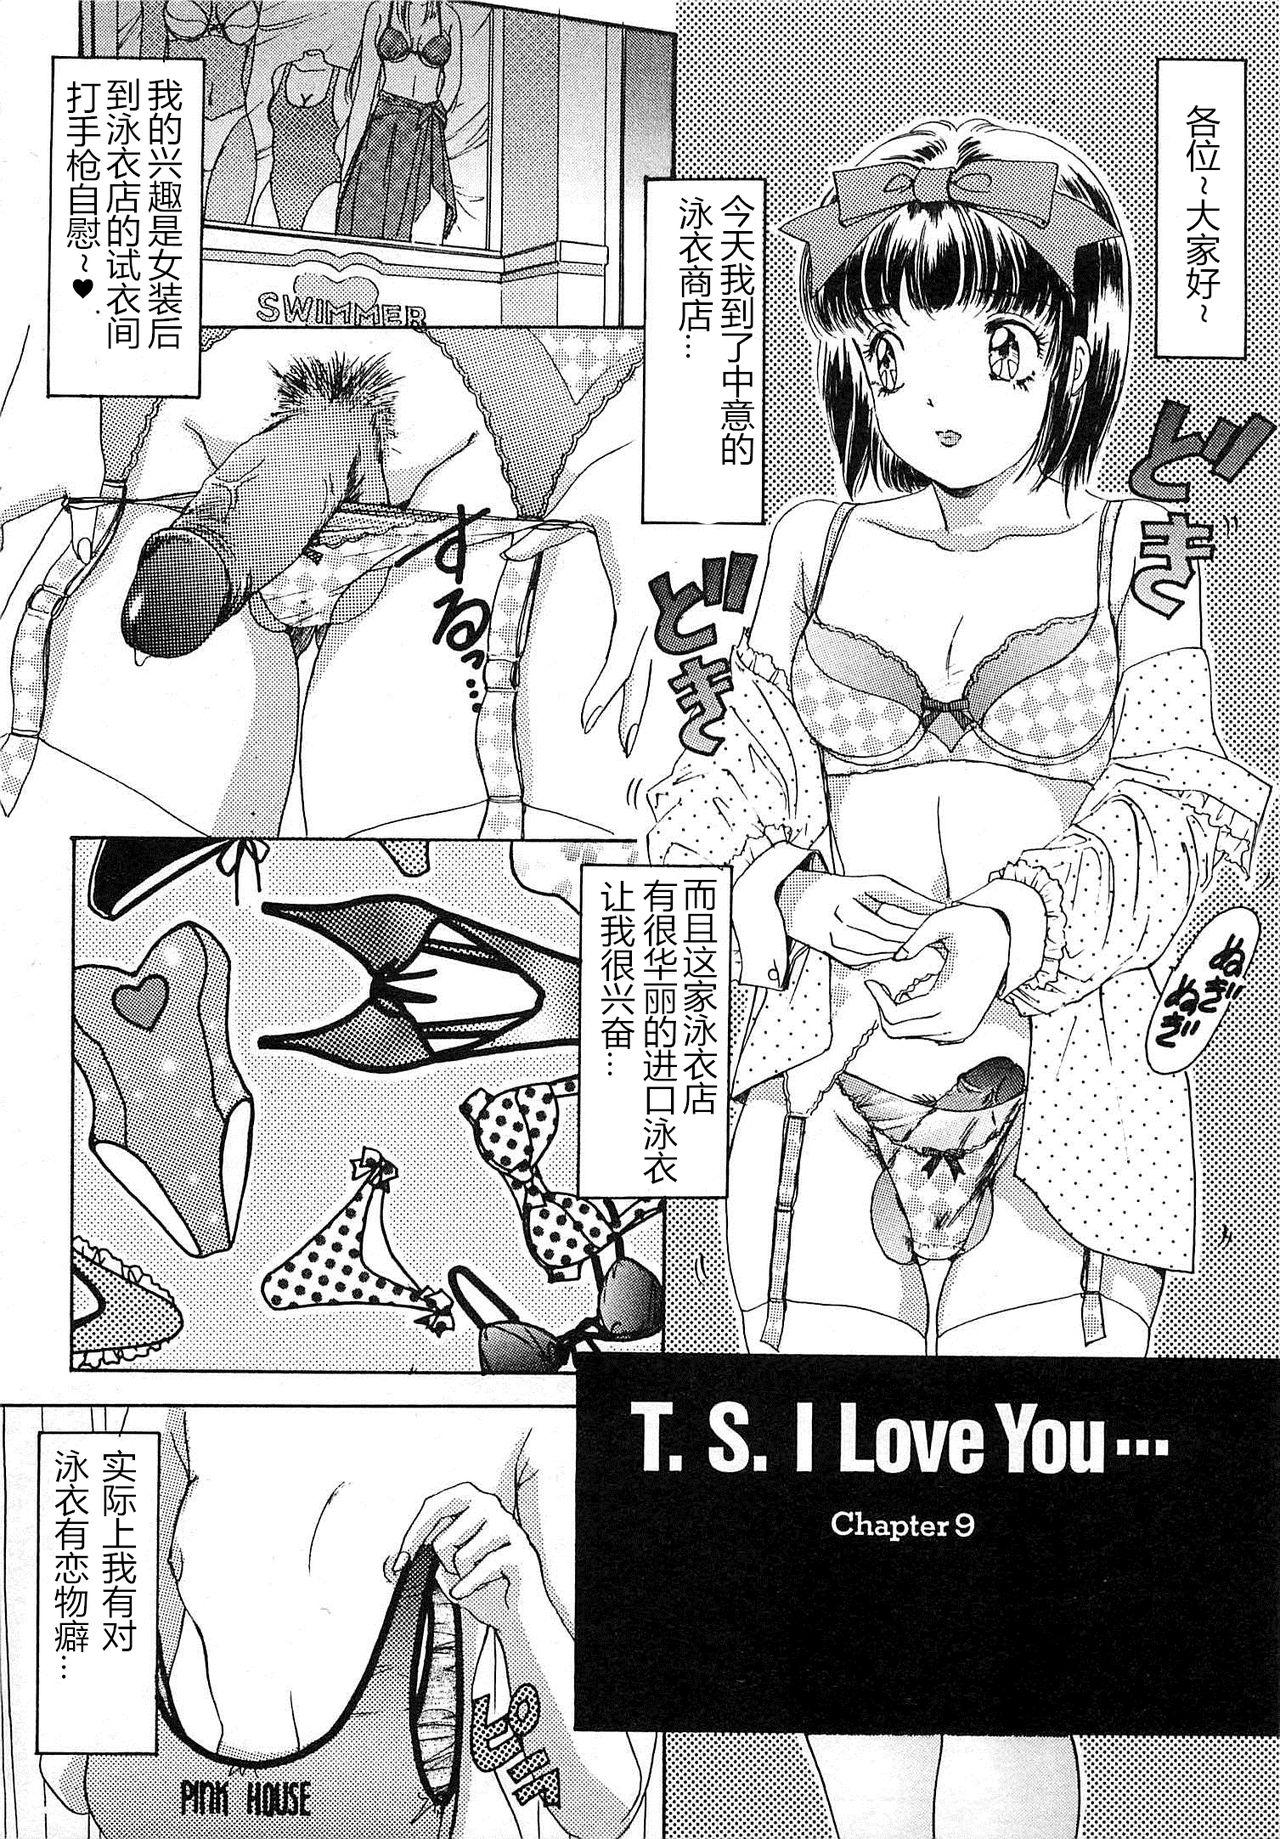 T.S. I LOVE YOU chapter 09 2